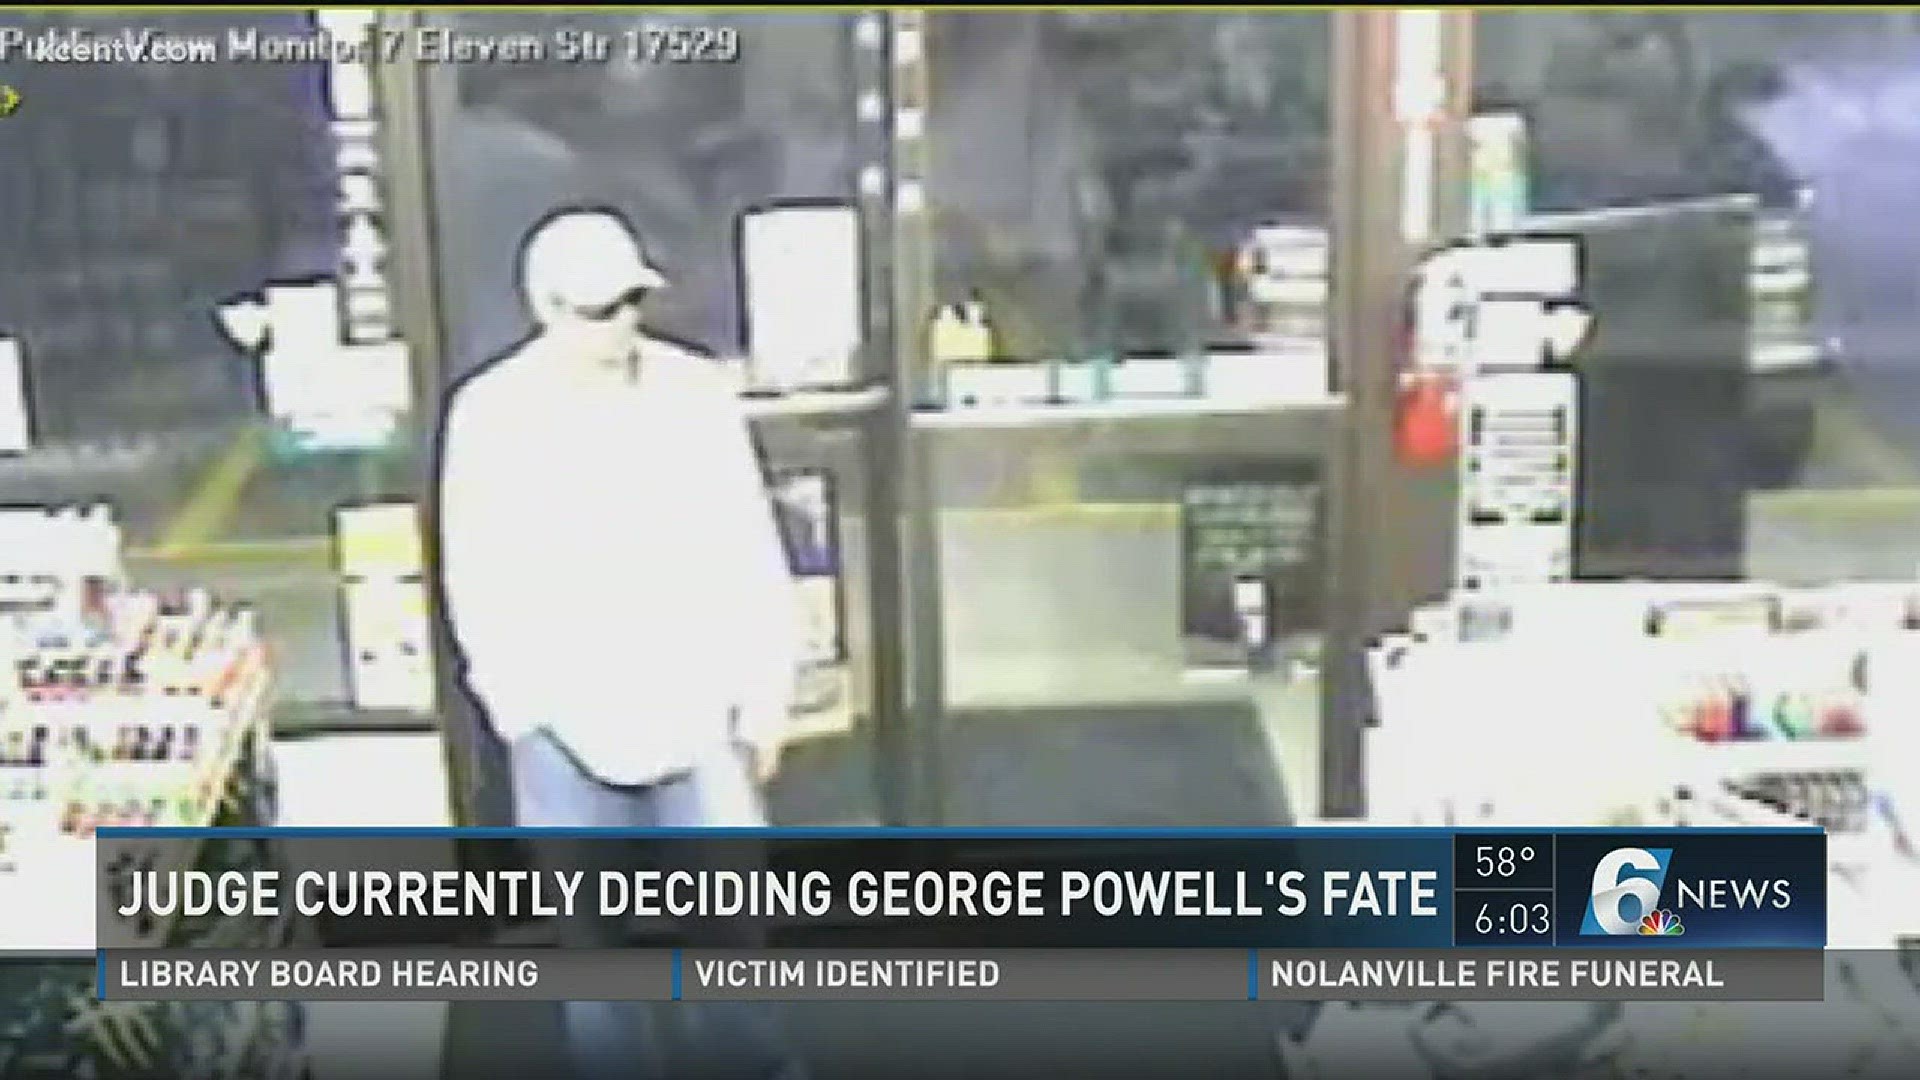 The fate of local inmate George Powell is now in the judge's hands as both the state and defense rested their cases to determine if Powell's conviction was justified.